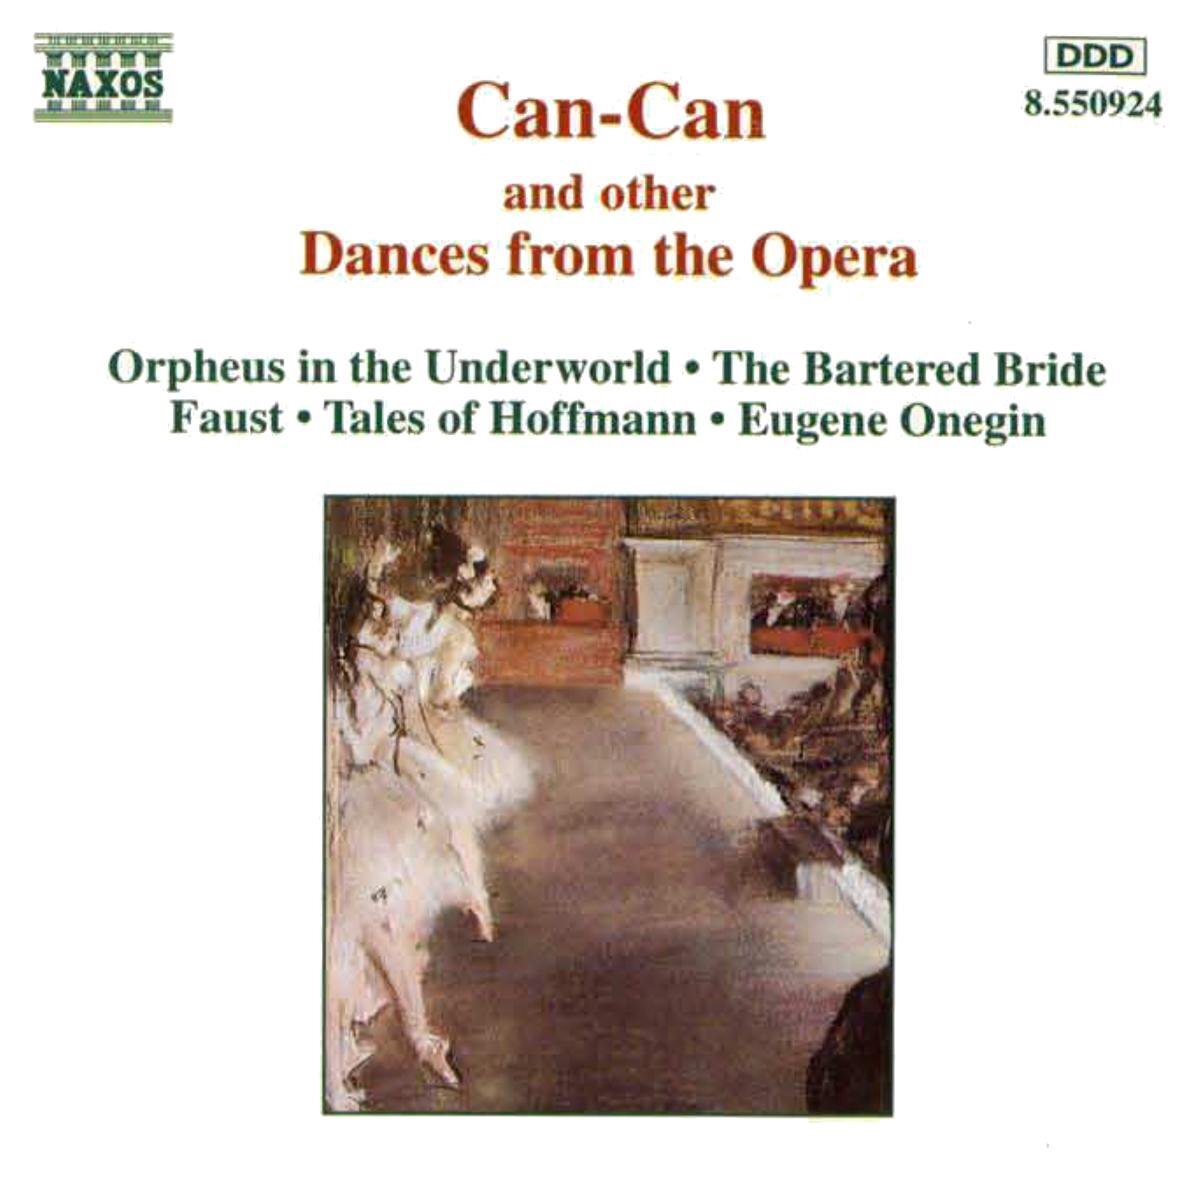 OUTHERE Can-Can and other Dances from the Opera